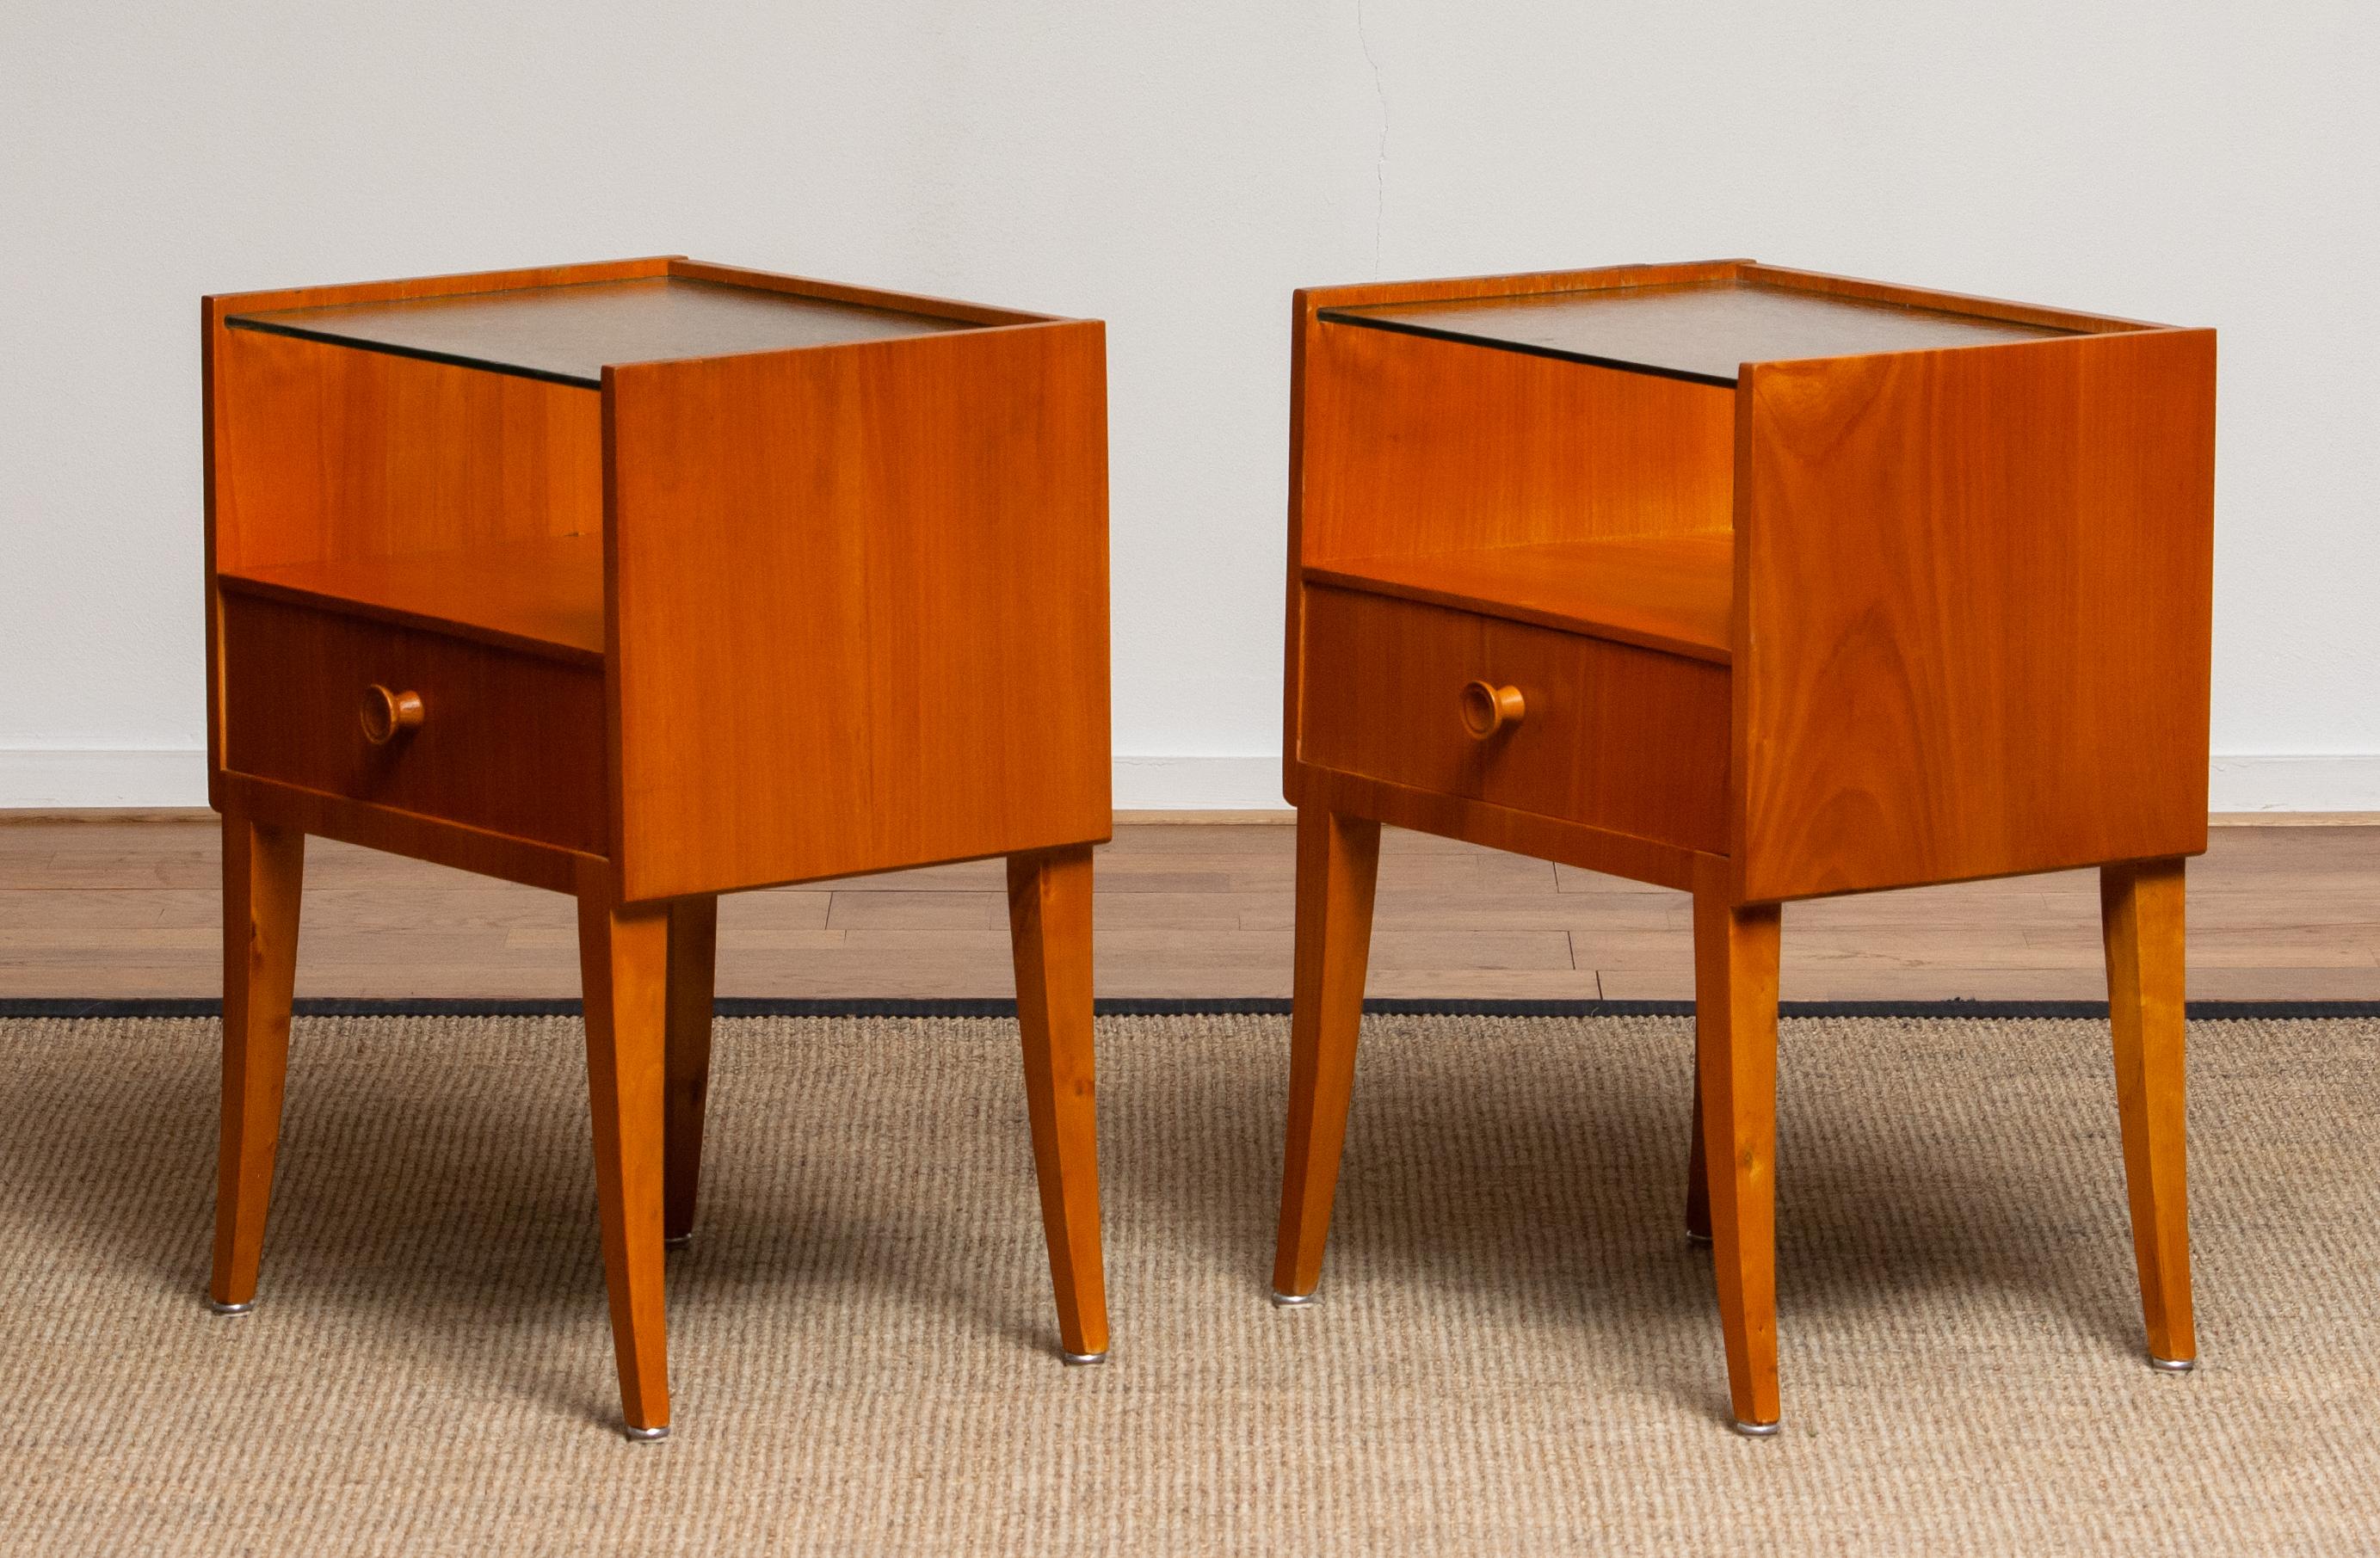 Scandinavian Modern 1950s Pair of Nightstands or Bedside Tables from Sweden in Elm with Glass Top